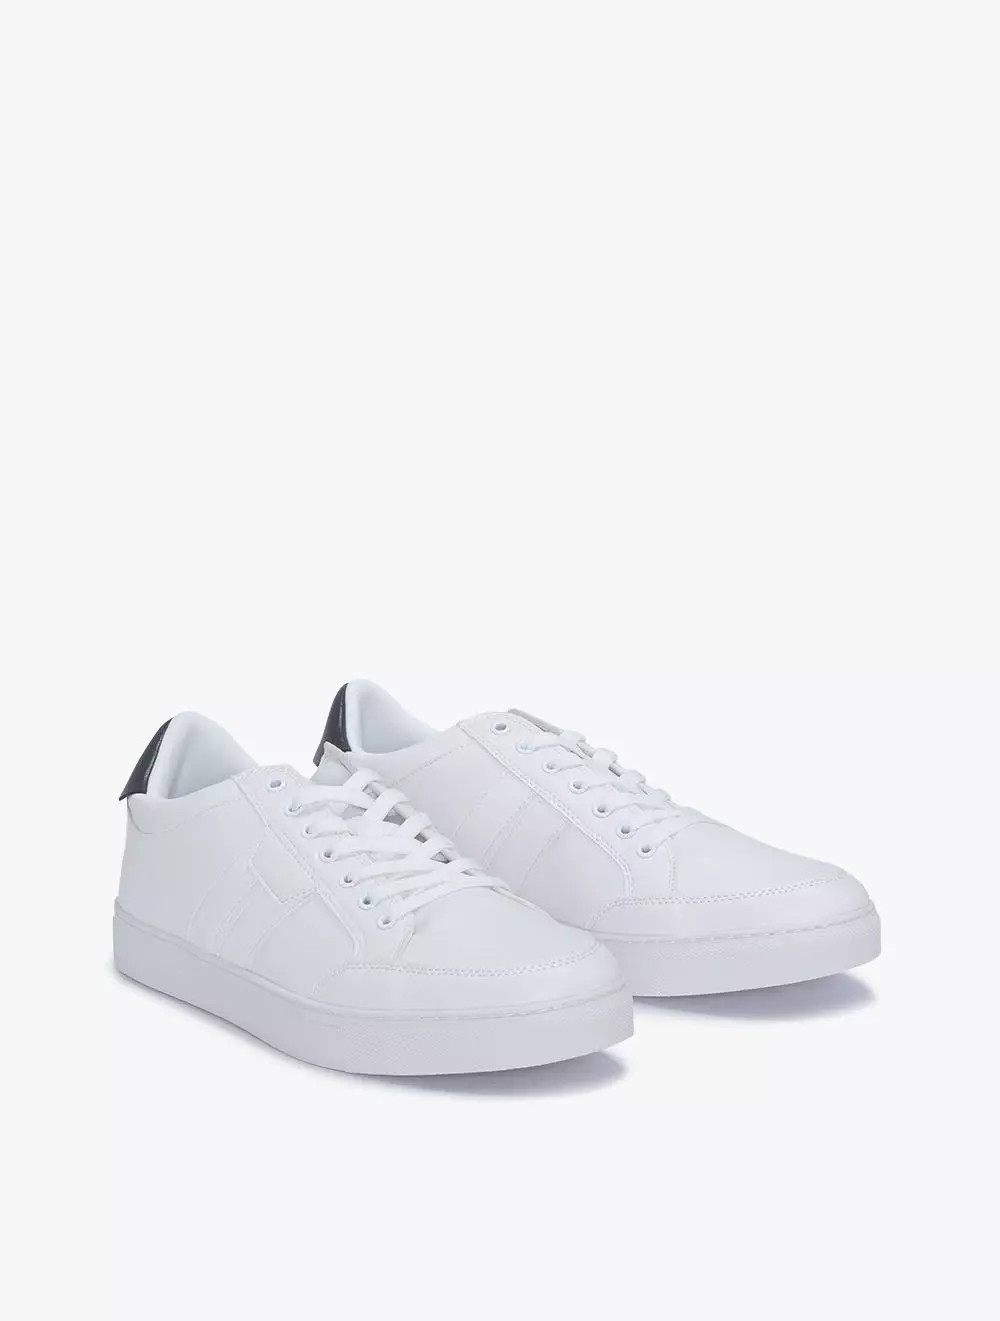 Jual PAYLESS Payless Club Culture Mens Orlan - White_01 - White ...